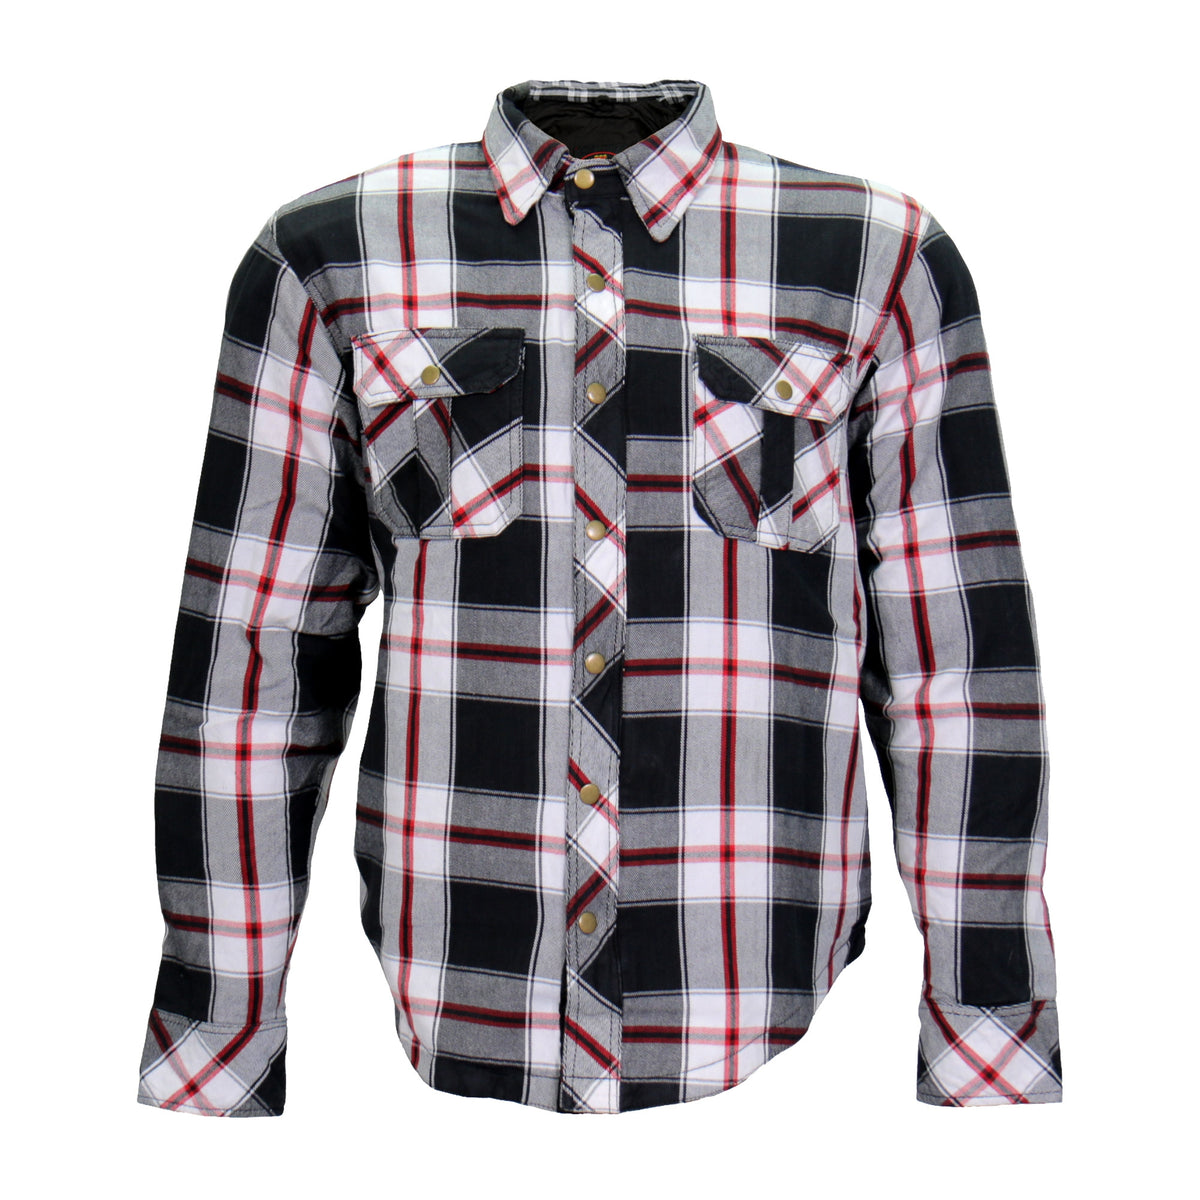 FLANNEL ARMOR RED WHITE GRAY